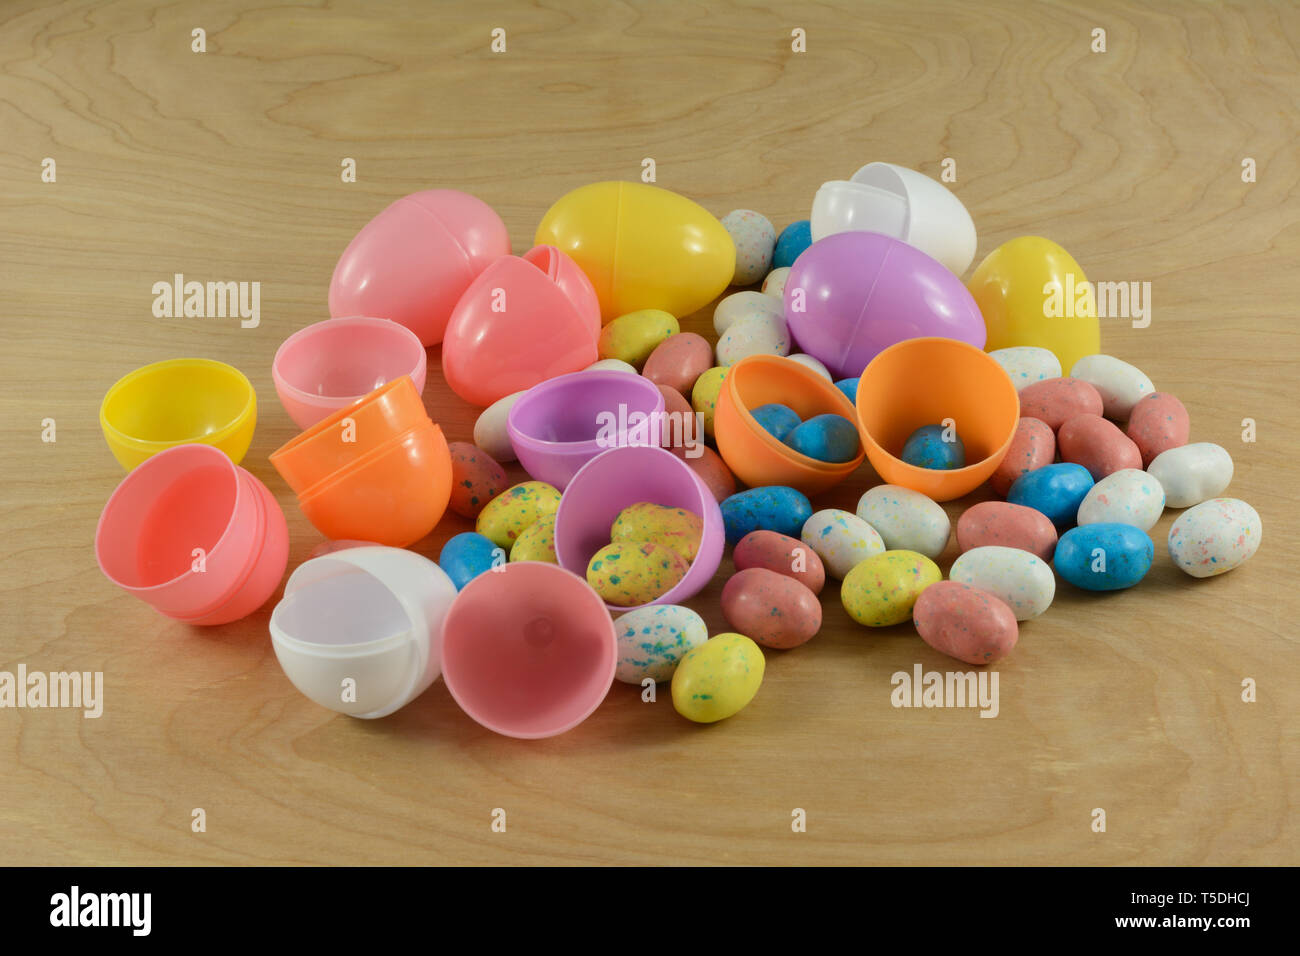 Preparing for Easter egg hunt by putting candy covered malted milk balls in shape of bird eggs into eco-friendly recyclable plastic Easter eggs made f Stock Photo